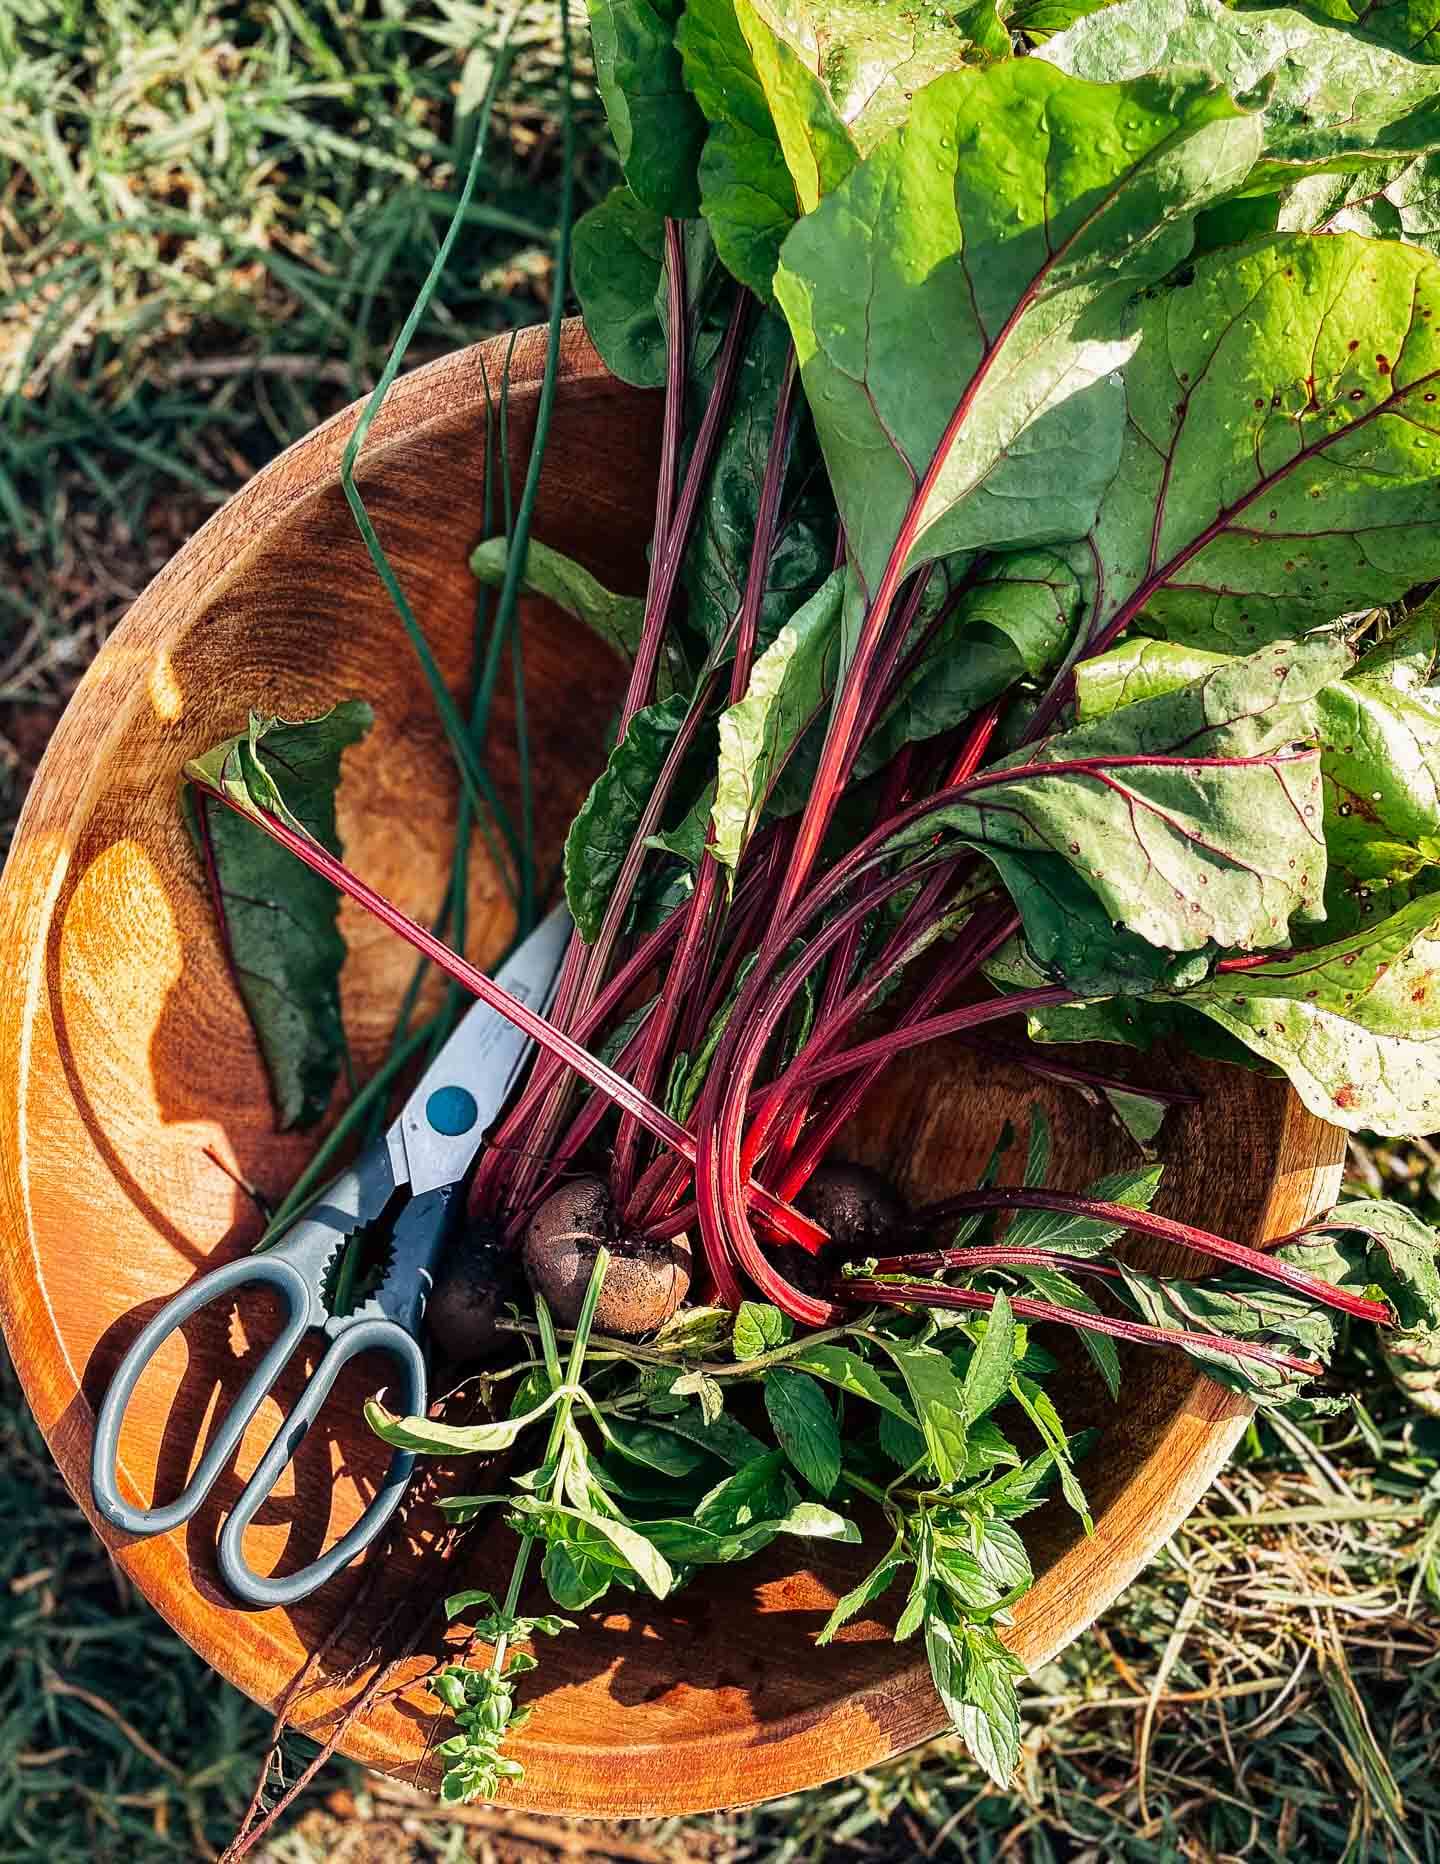 Just-harvested beets in a wooden bowl with scissors. 